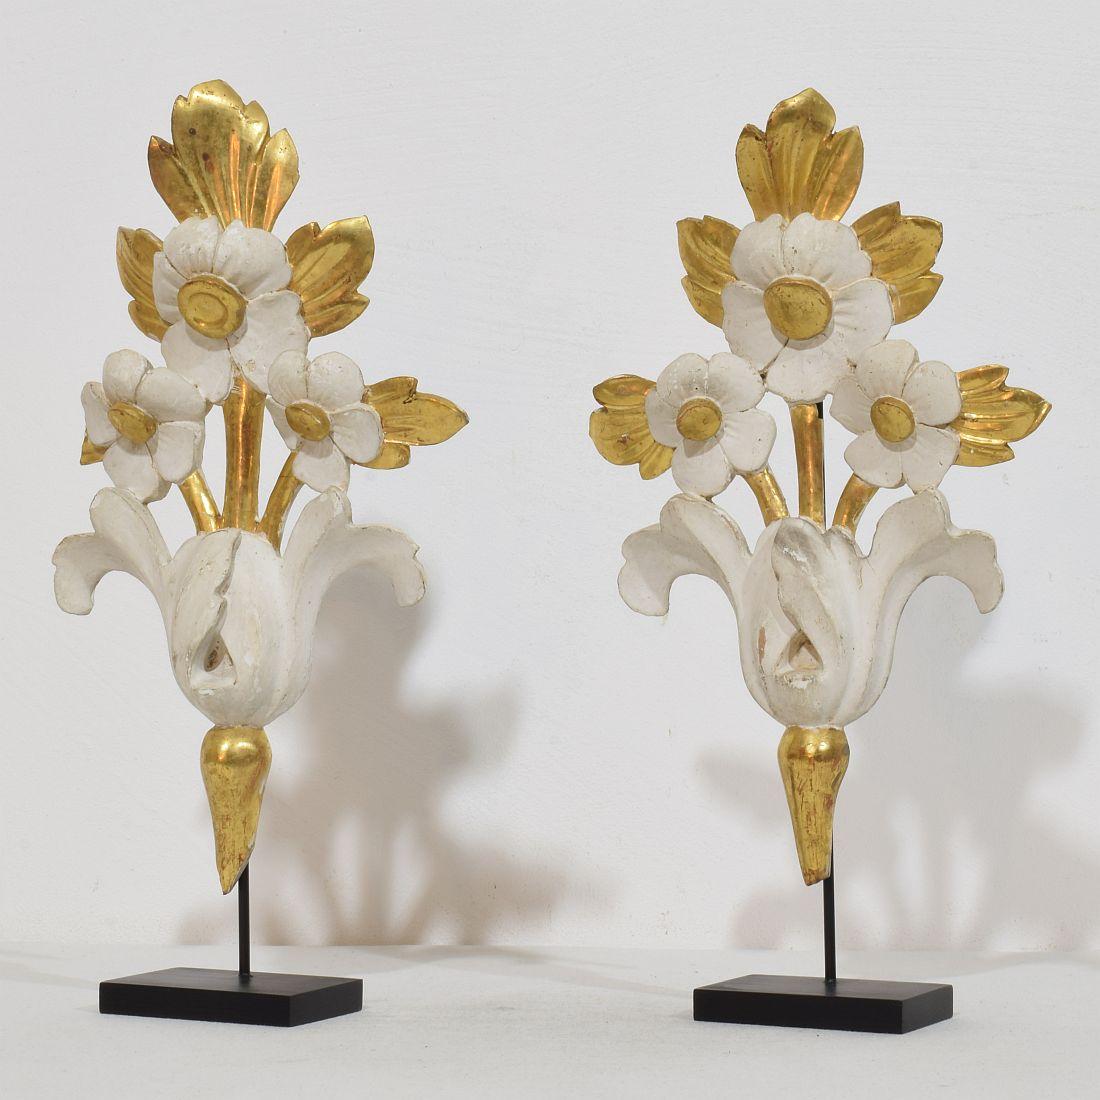 
Beautiful handcarved giltwood ornaments that once adorned a chapel .Original period pieces that due their high age have a beautiful weathered look.
Italy circa 1780/1850 , weathered,small losses and old repairs.
Measurements are individual and